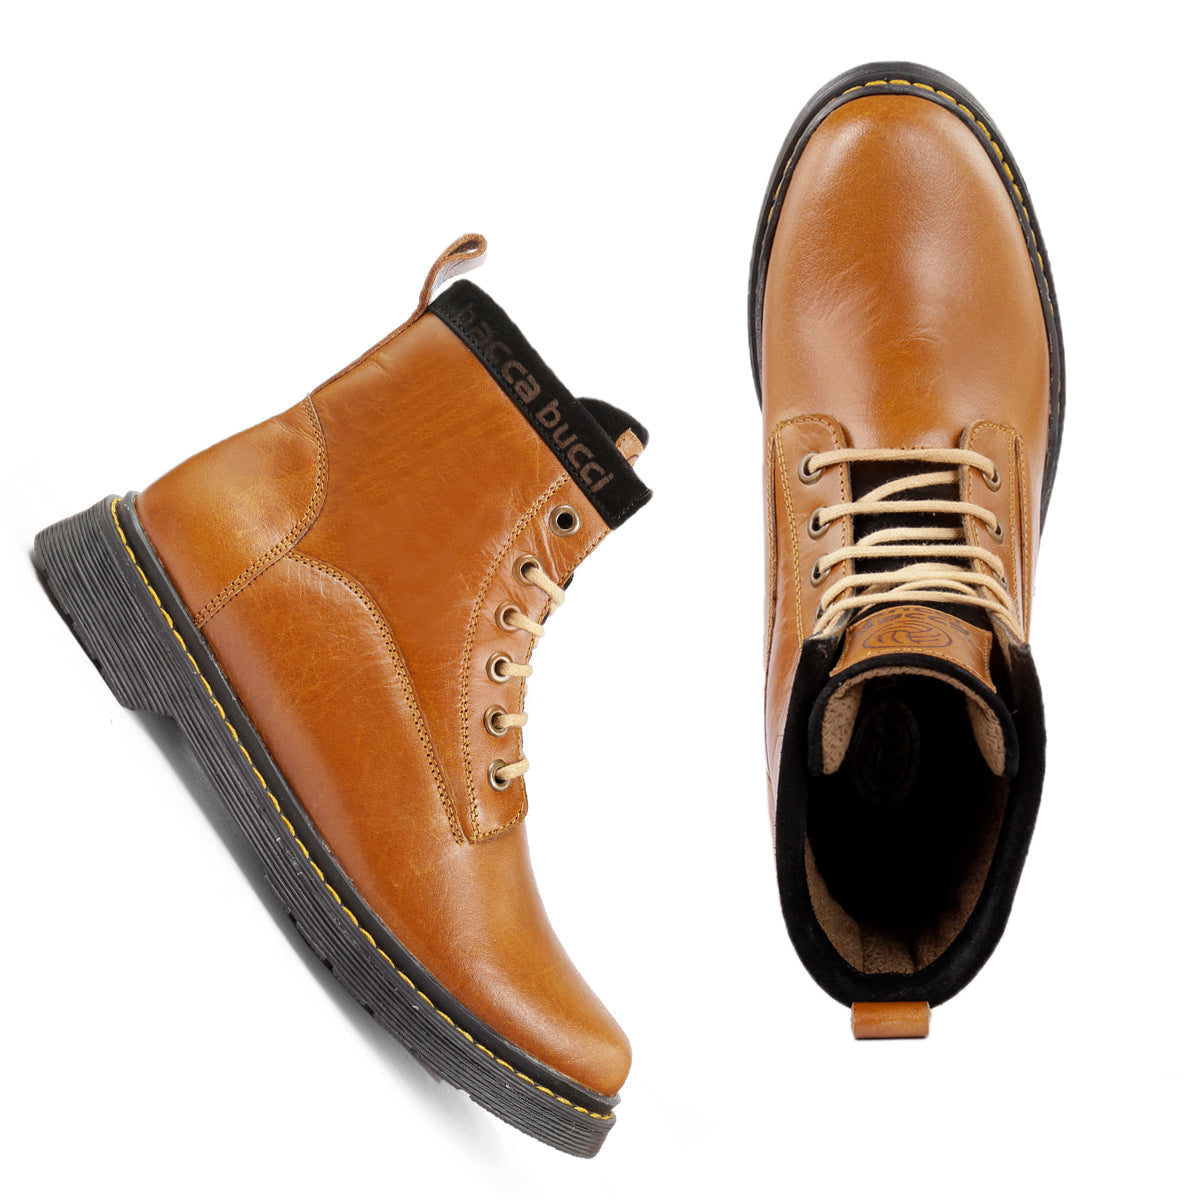 genuine leather boots, combat boots, smooth leather boots, best leather boots 